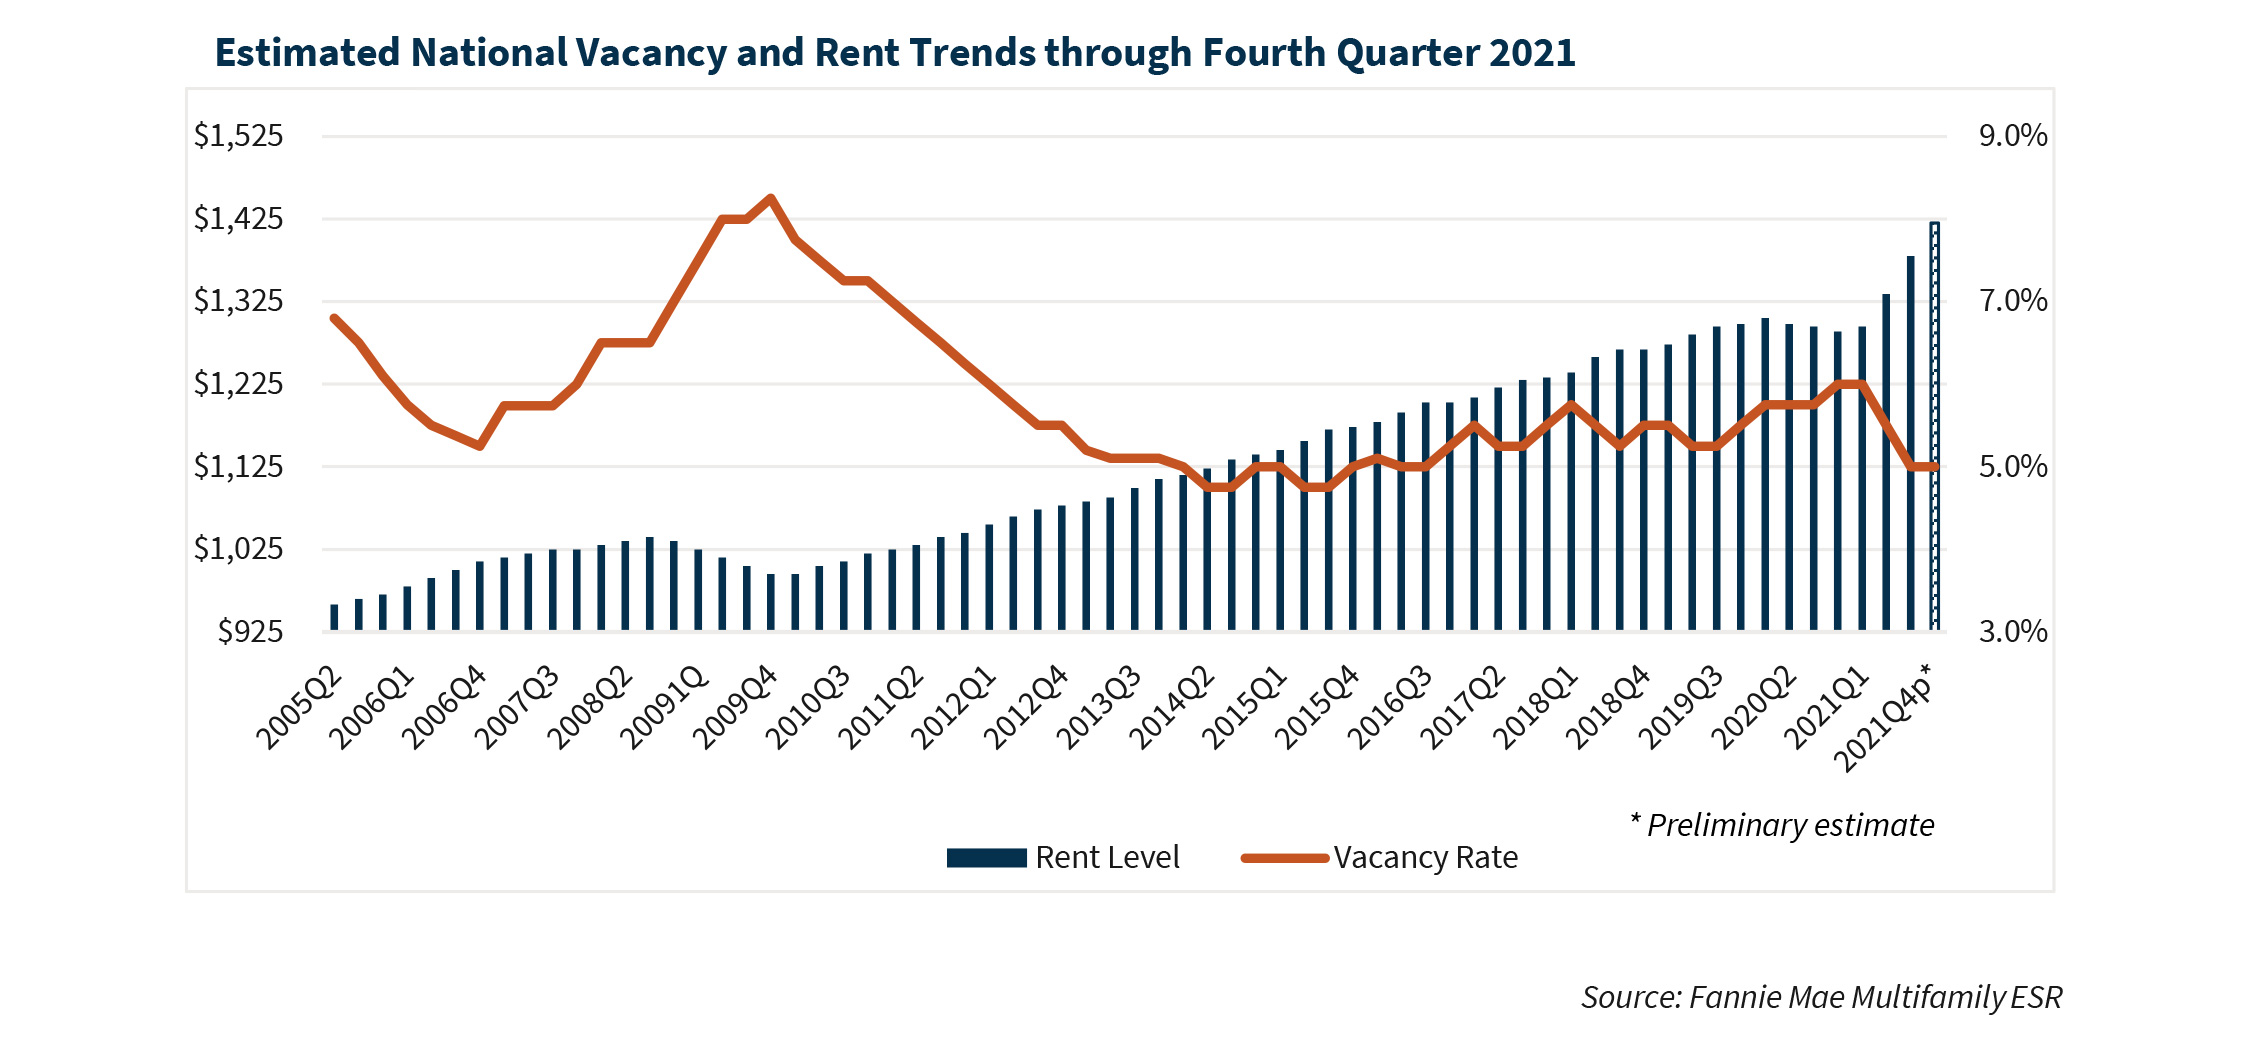 Estimated National Vacancy and Rent Trends through Fourth Quarter 2021